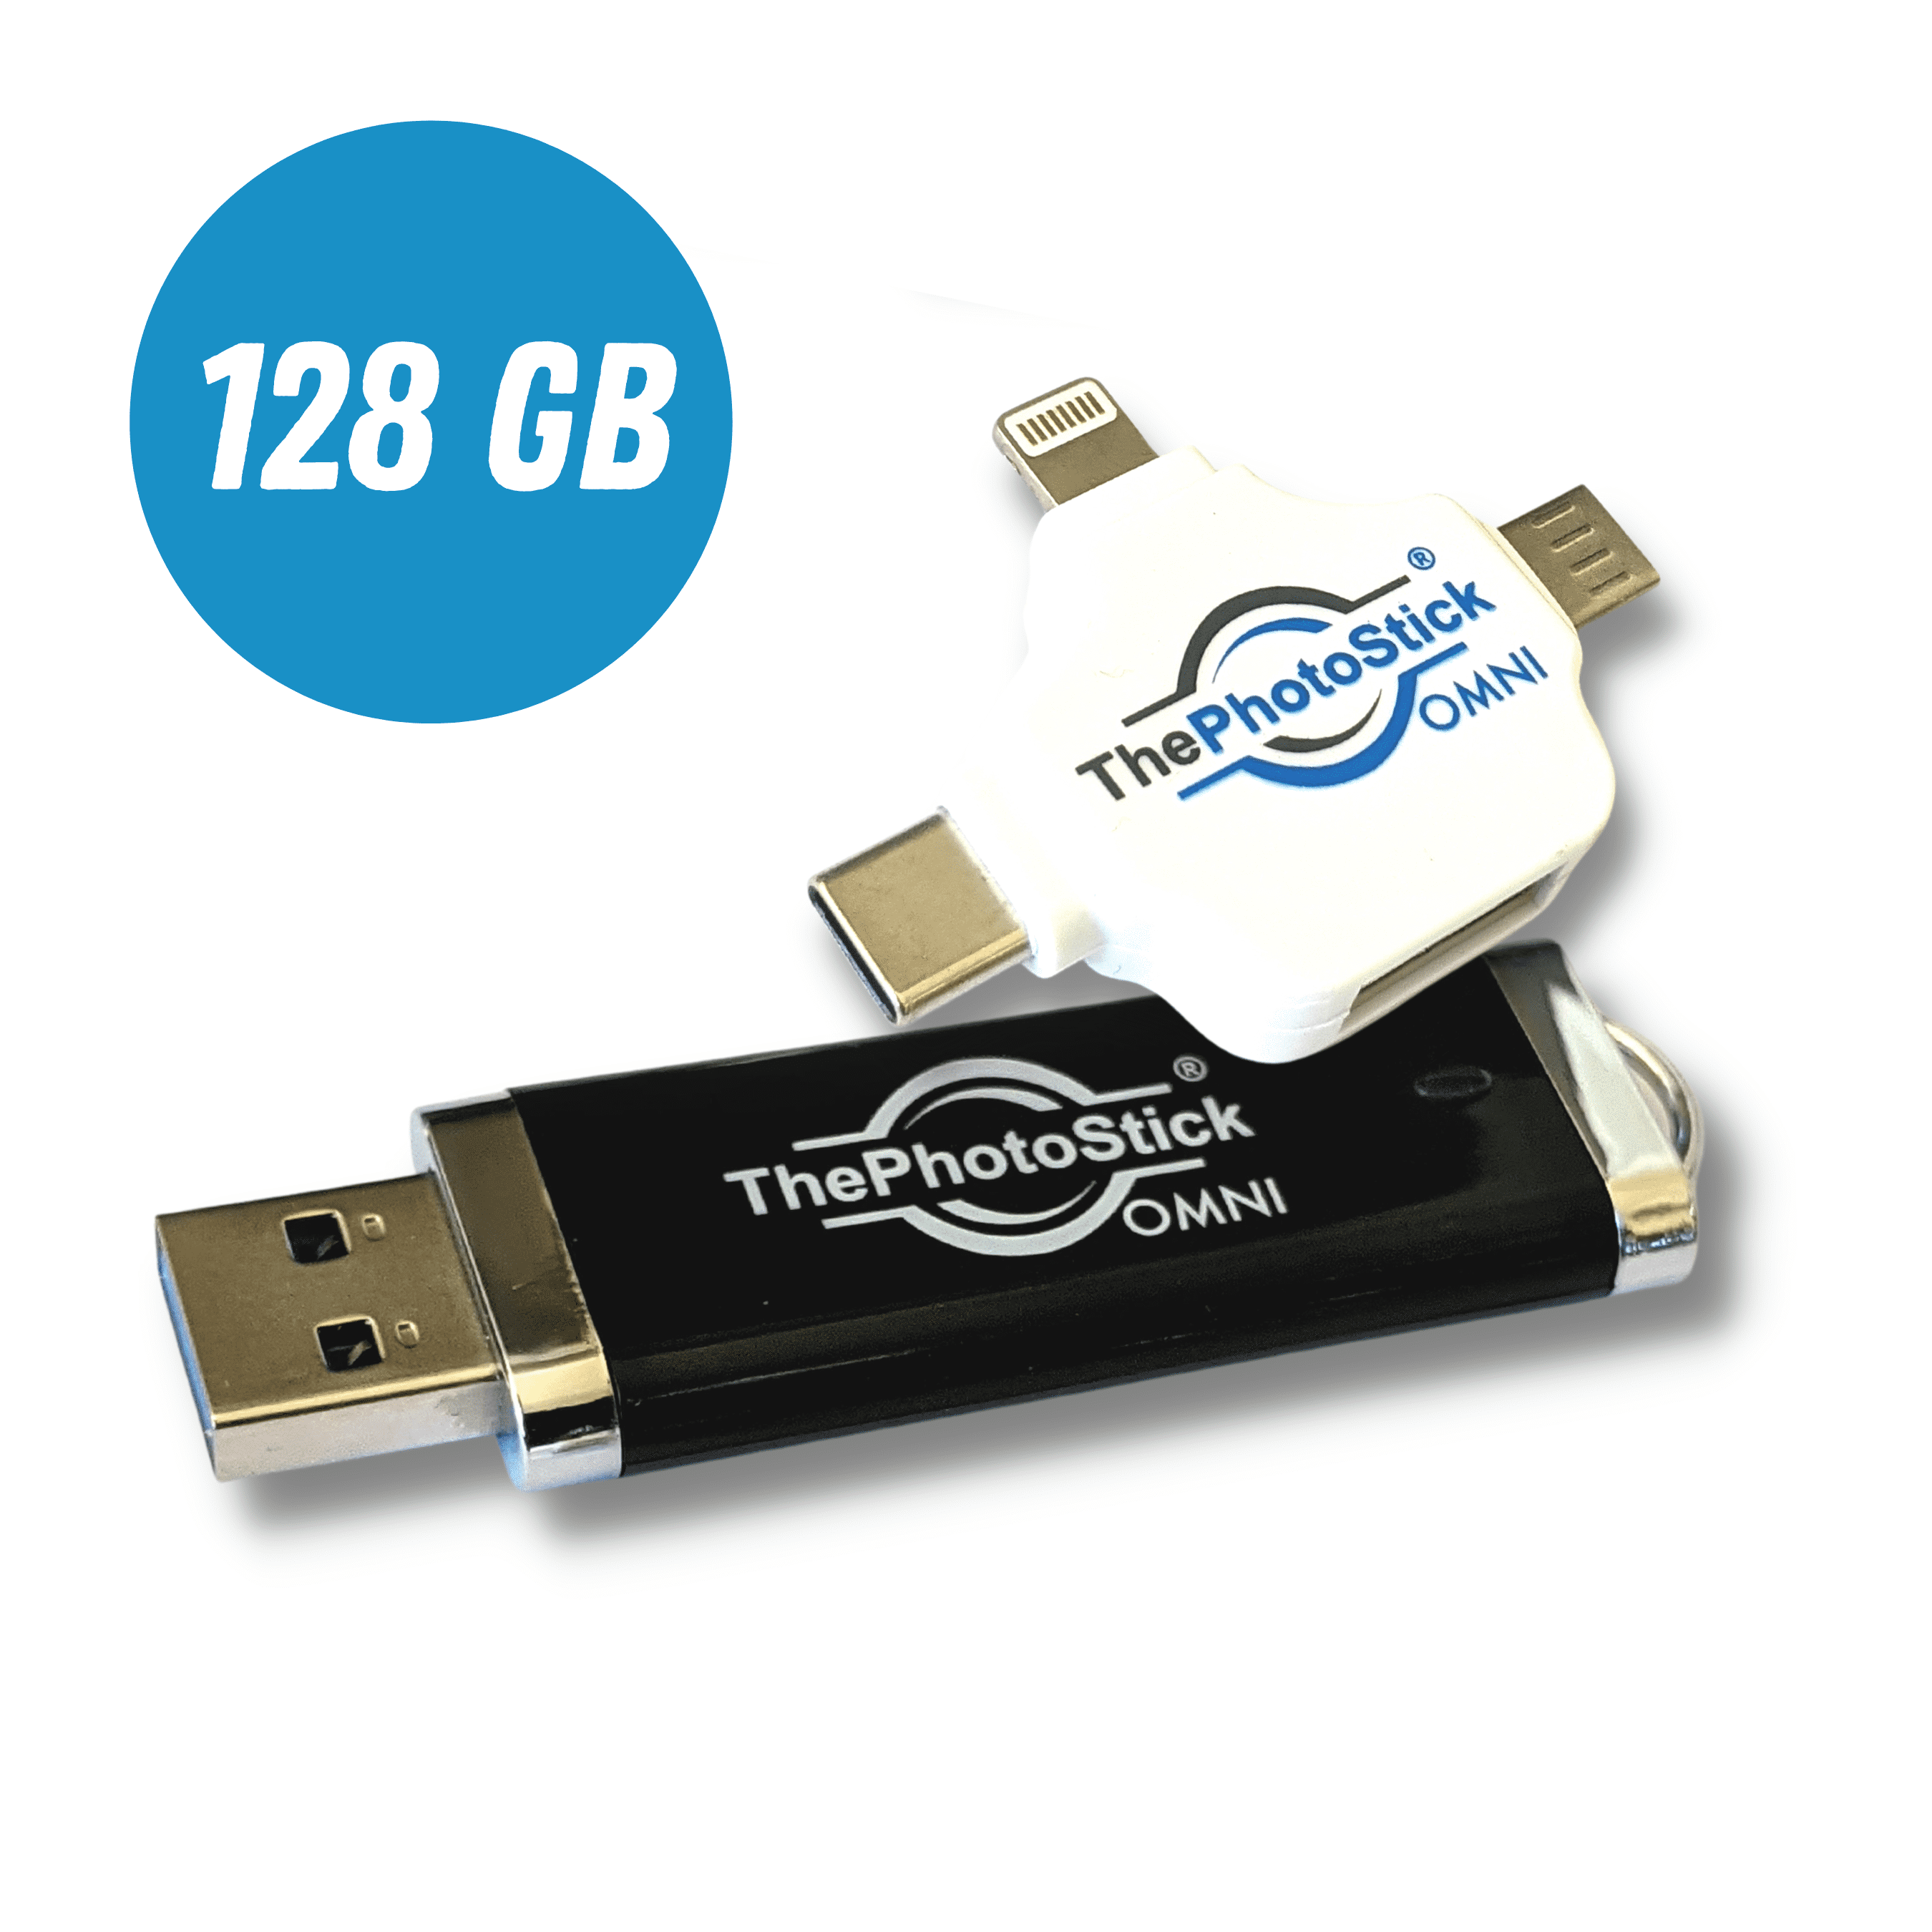 ThePhotoStick® Omni - 128GB | Photo & Video Backup, File Save & Transfer,  USB & Multiport Connection